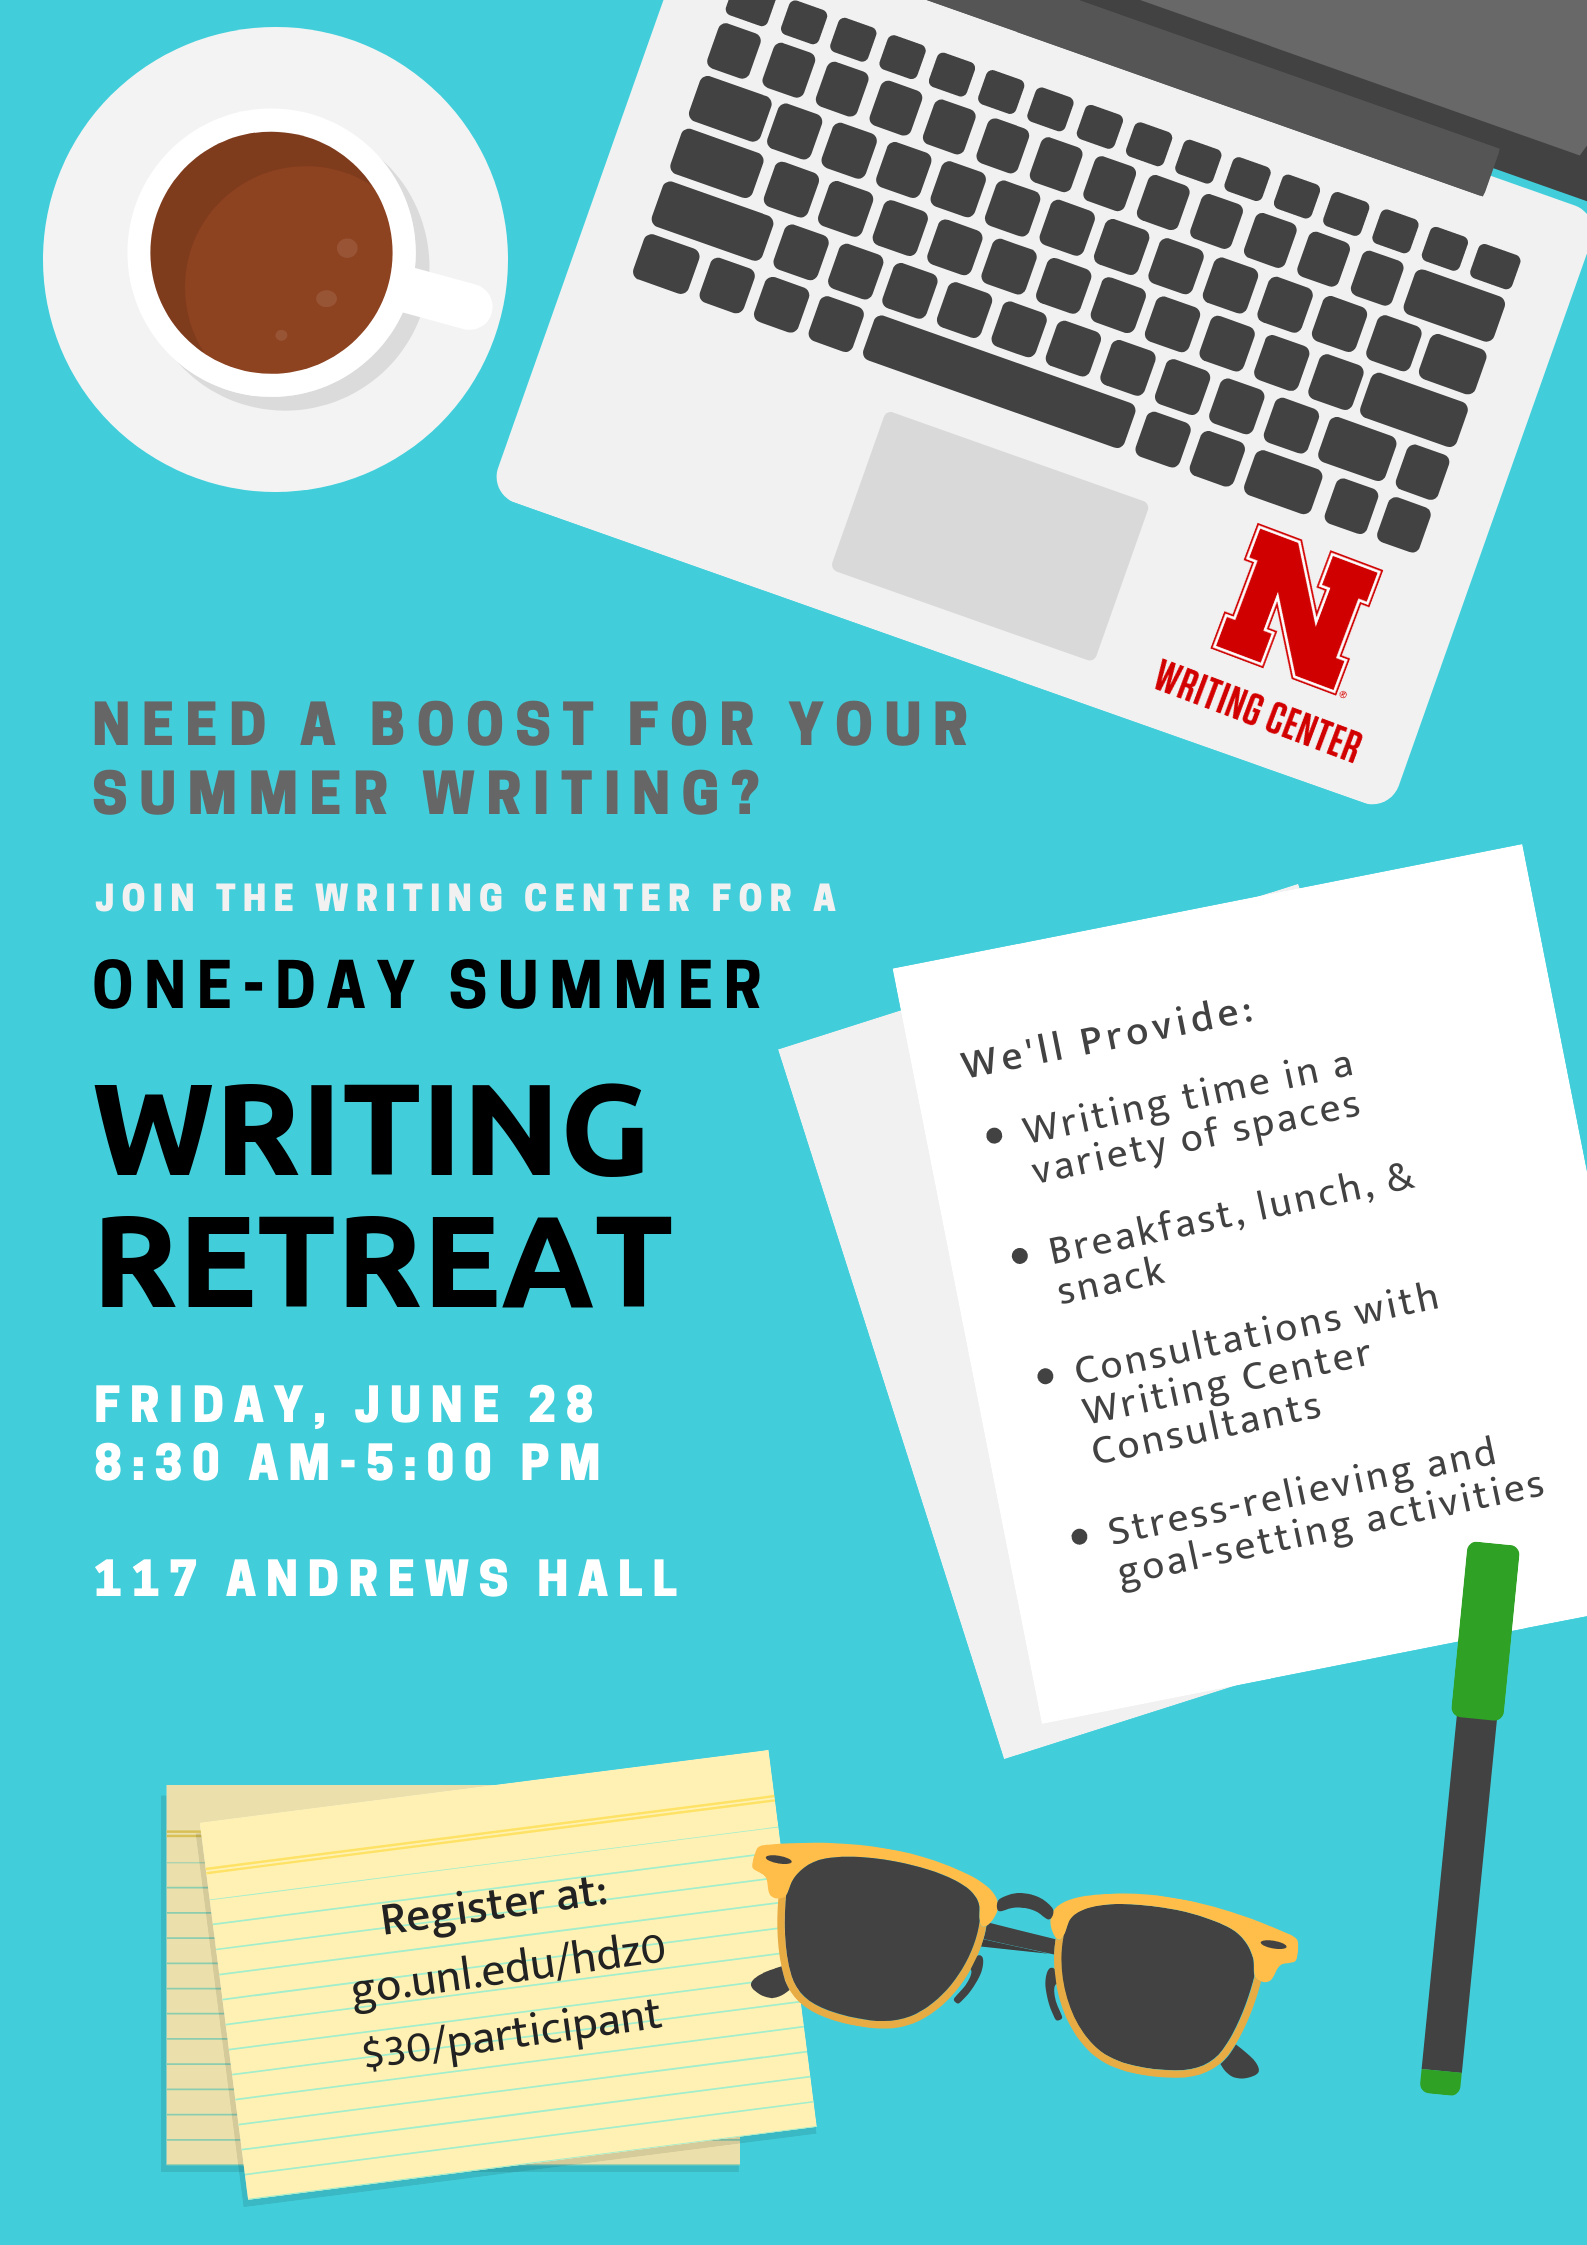 Register for the Writing Center’s One-Day Summer Writing Retreat on June 28 from 8:30 a.m. to 5 p.m. in Andrews Hall. 